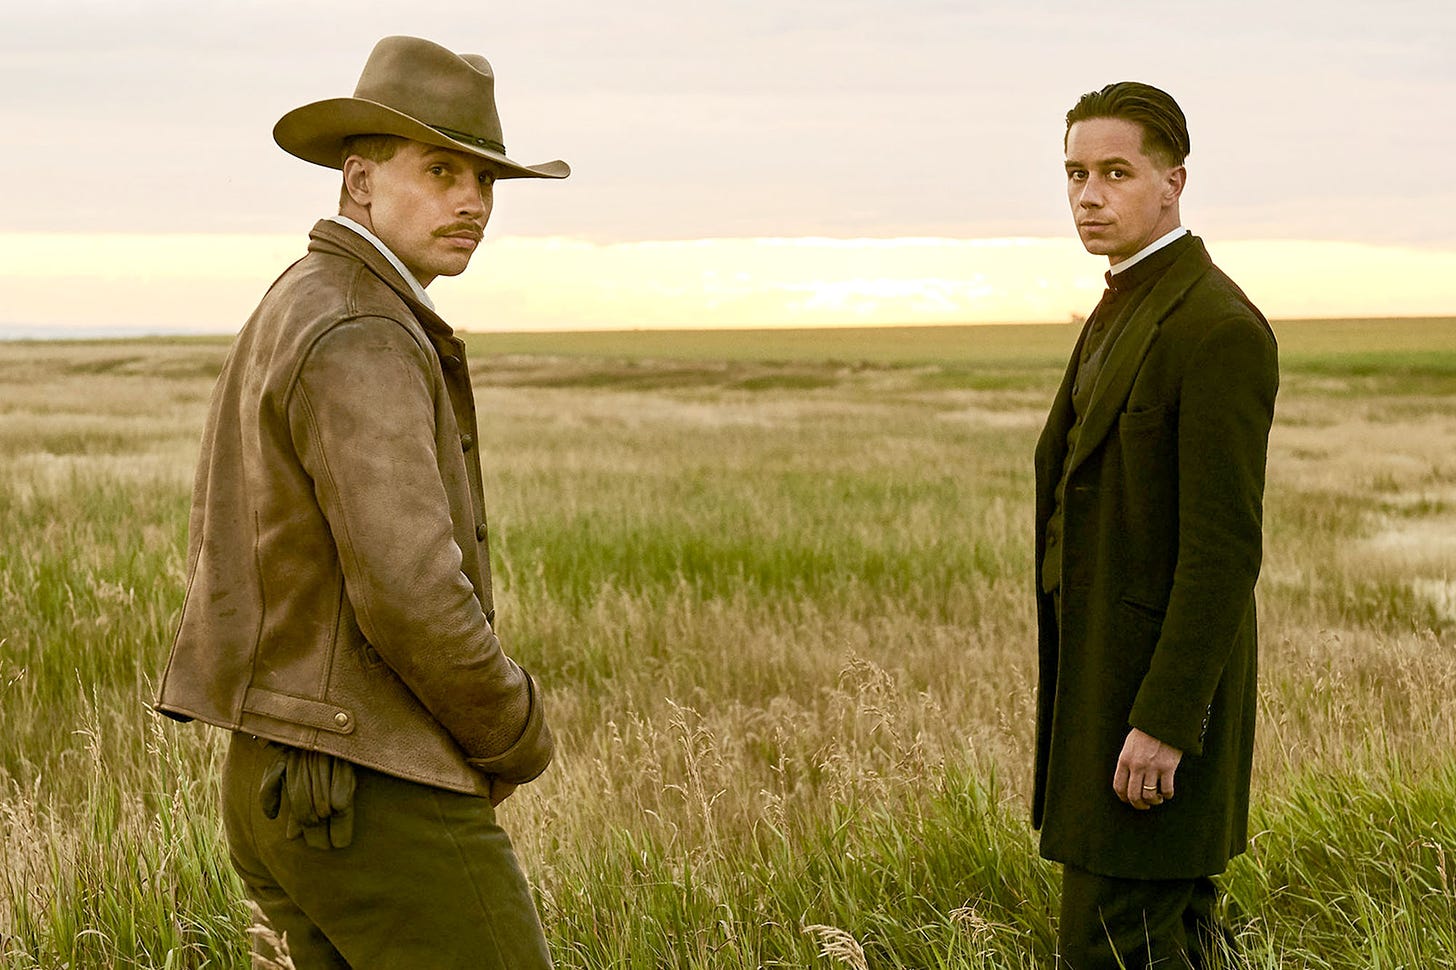 USA Network charts new Wild West path with 'Damnation'